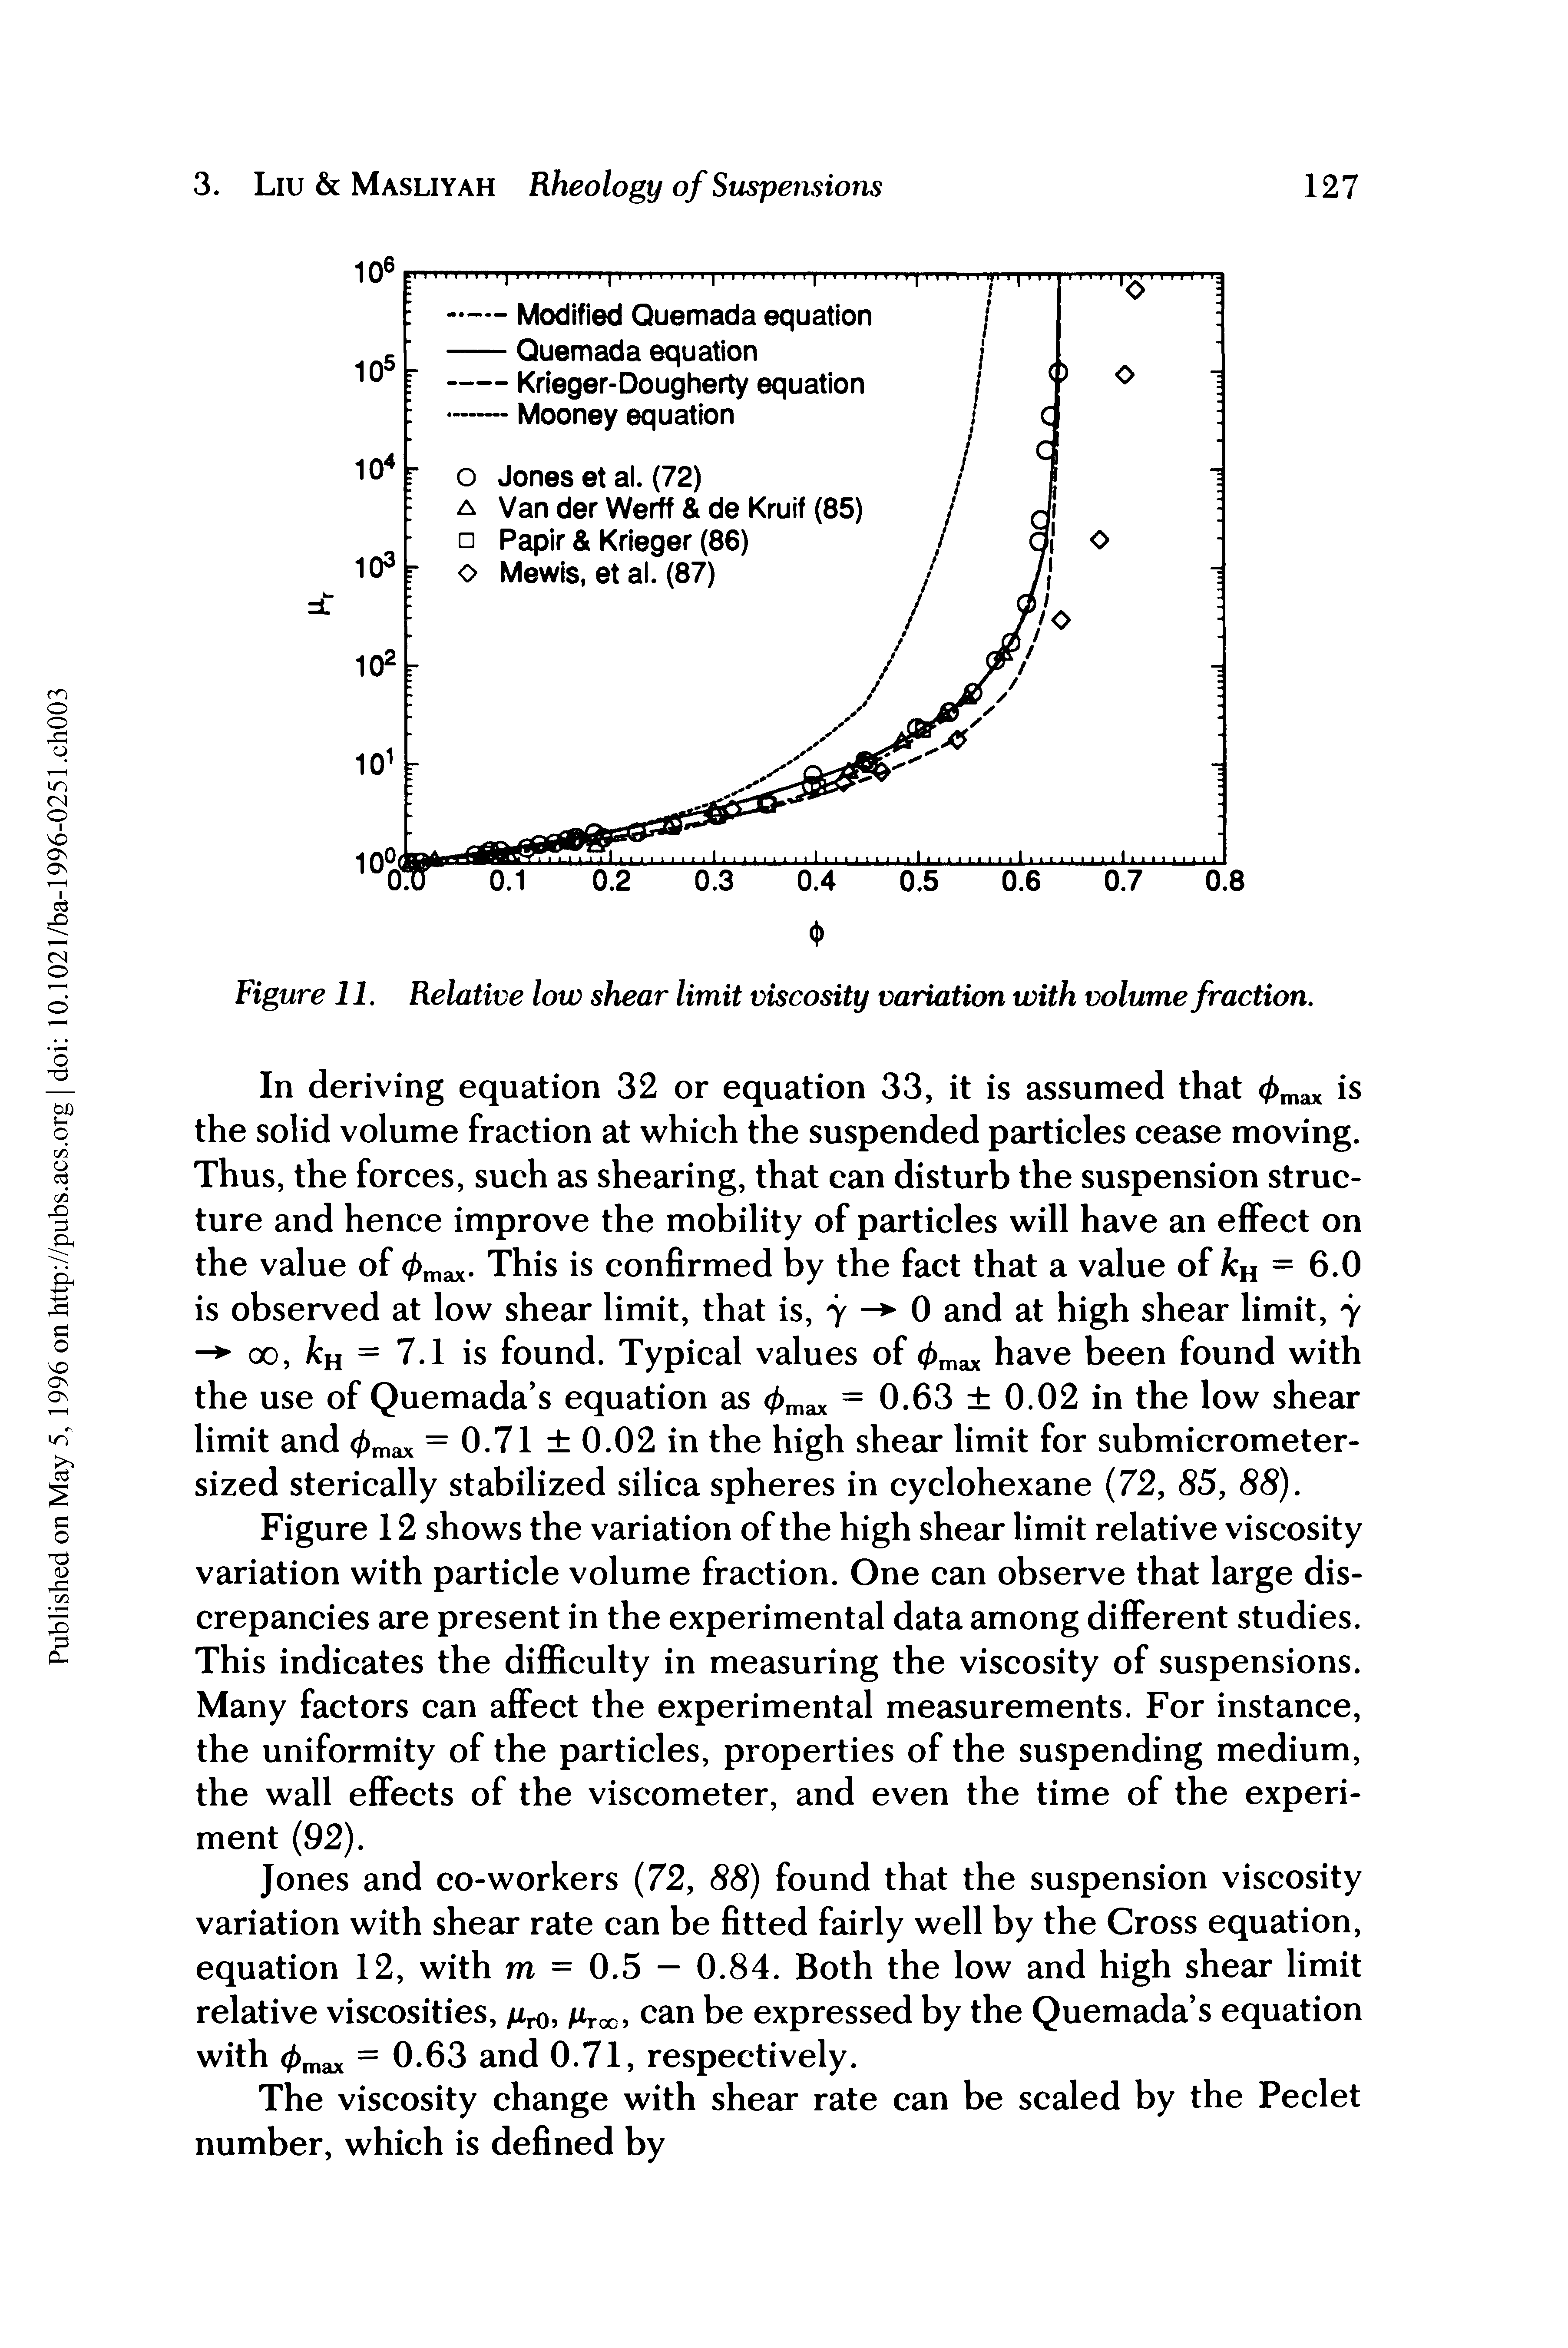 Figure 11. Relative low shear limit viscosity variation with volume fraction.